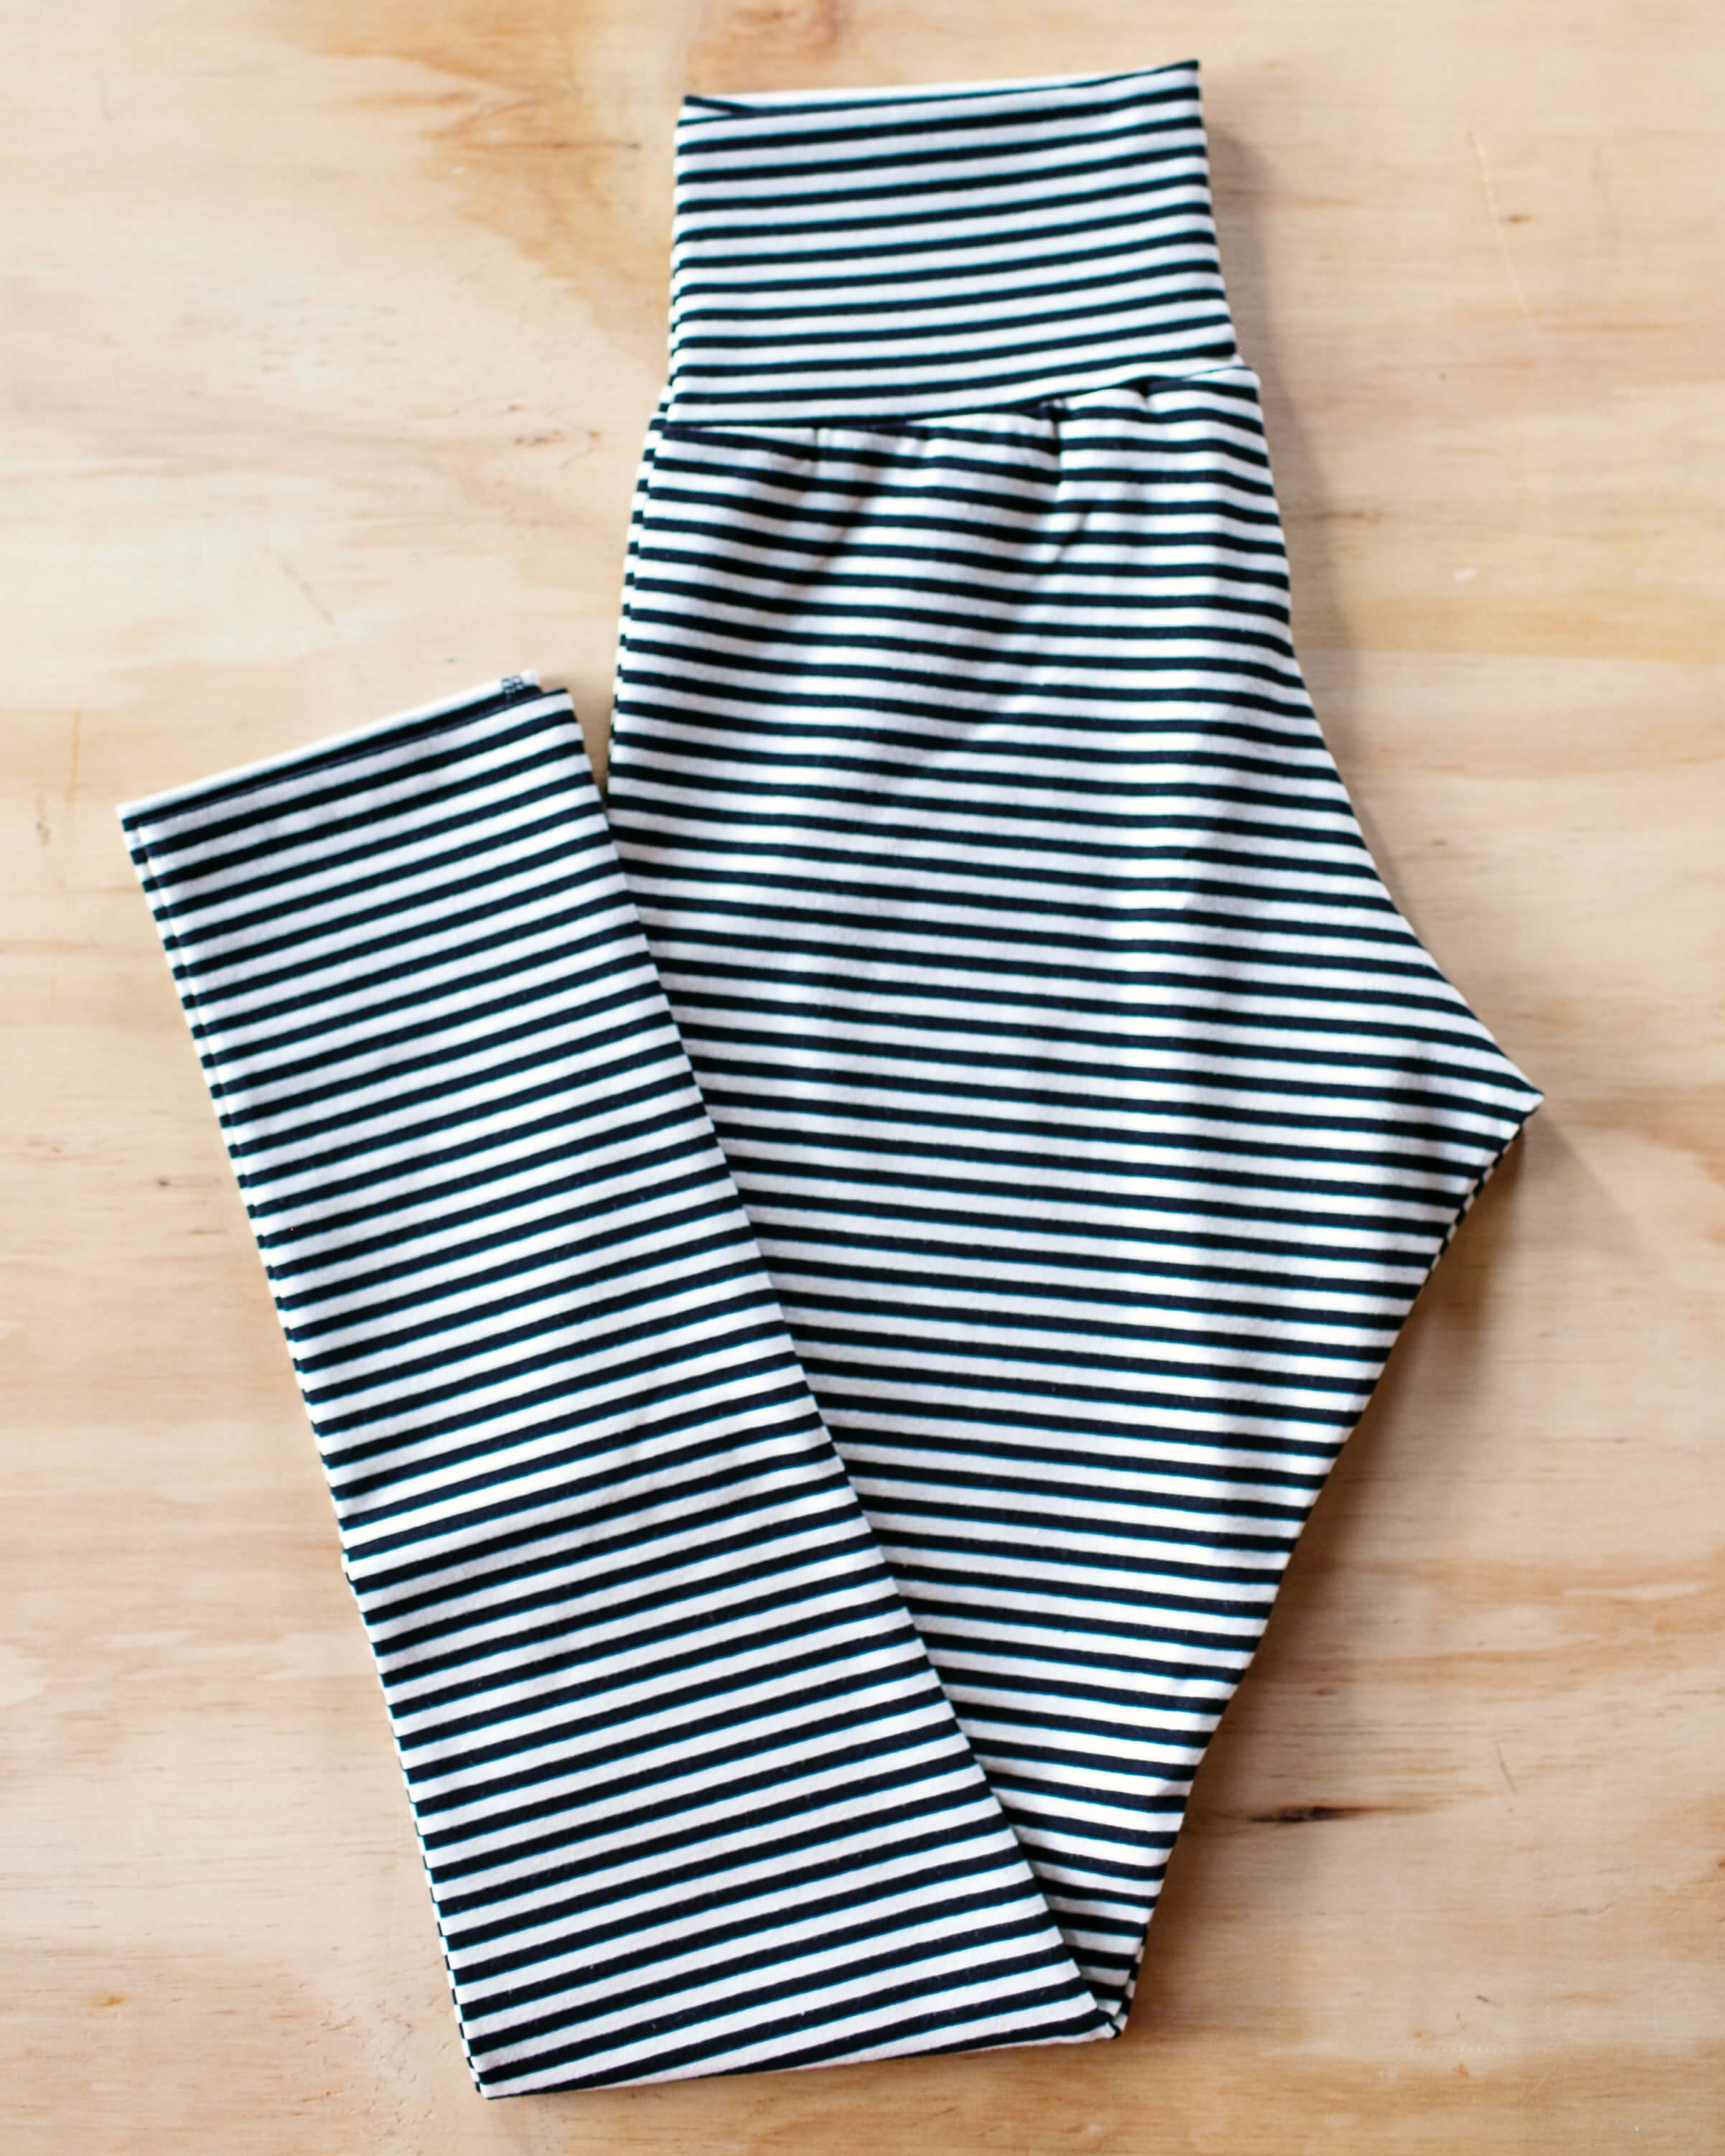 Flat lay of Thunderpants Ankle Length Leggings in Black and White Stripe.